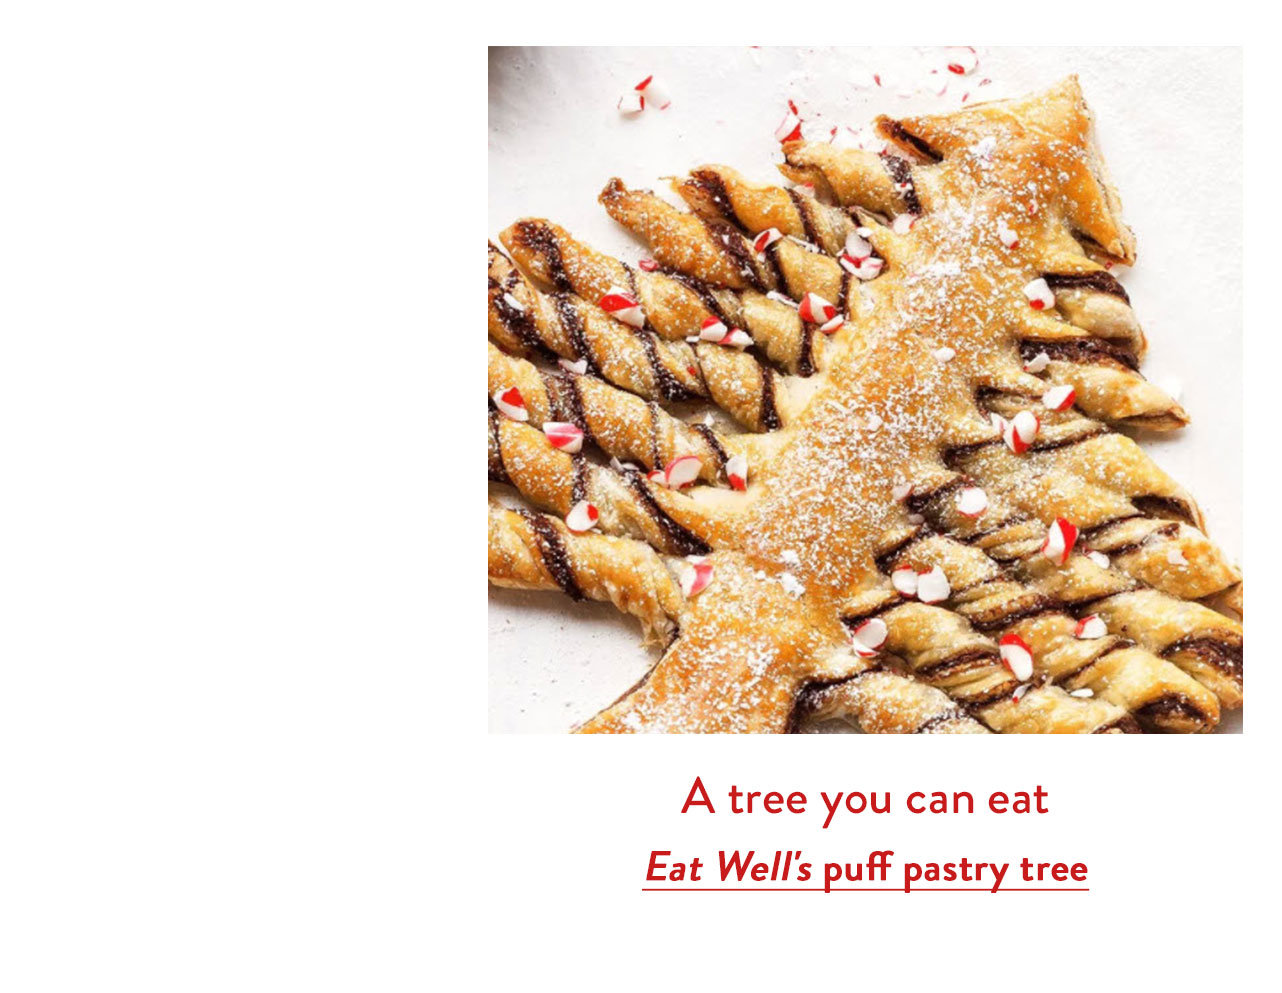 Eat Well's puff pastry tree 